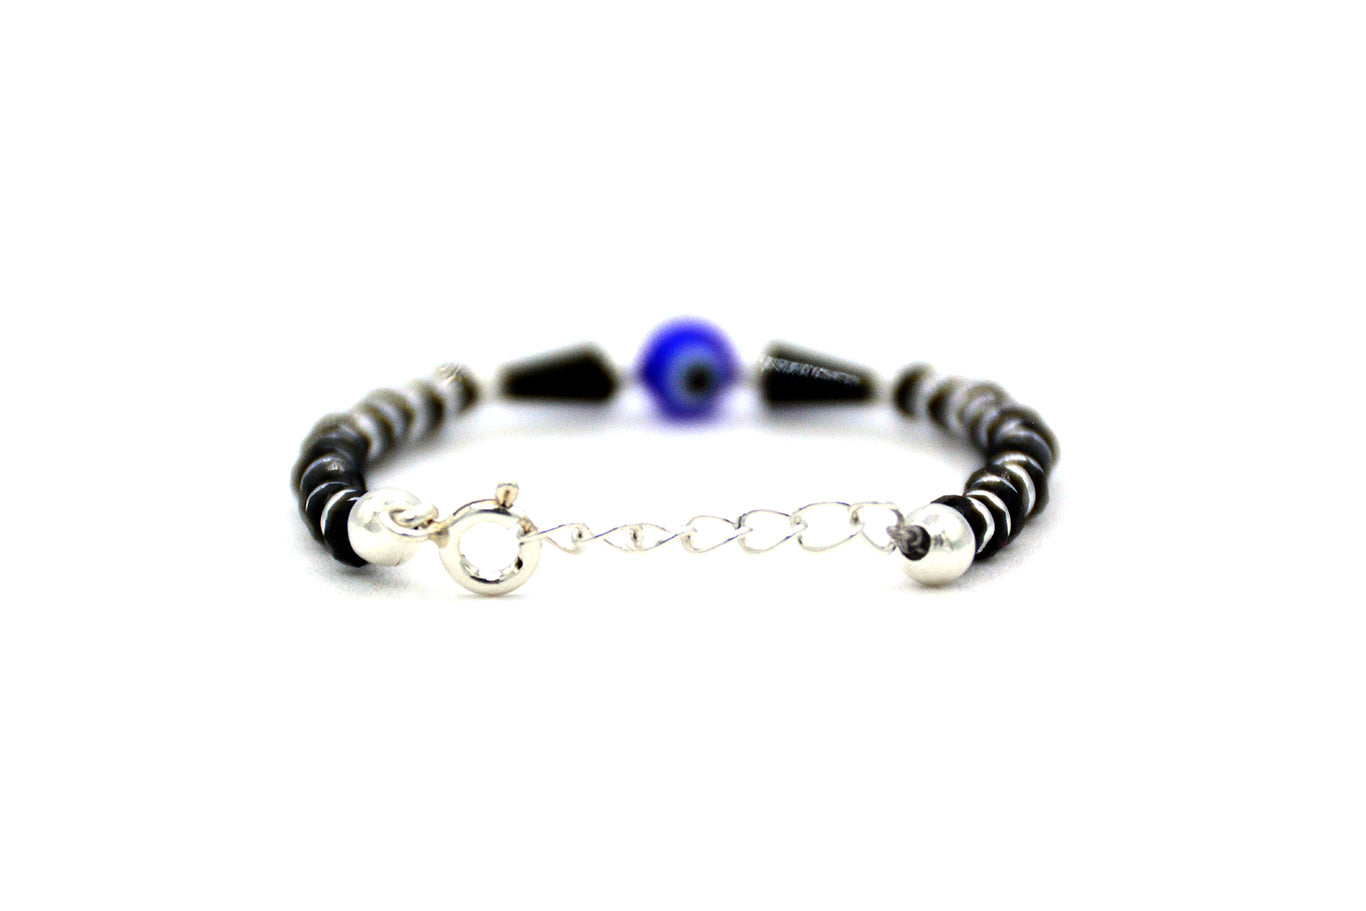 925 Sterling Silver Baby Bracelet with Black Beads, Silver Rings, Triangular Black Beads Around Evil Eye